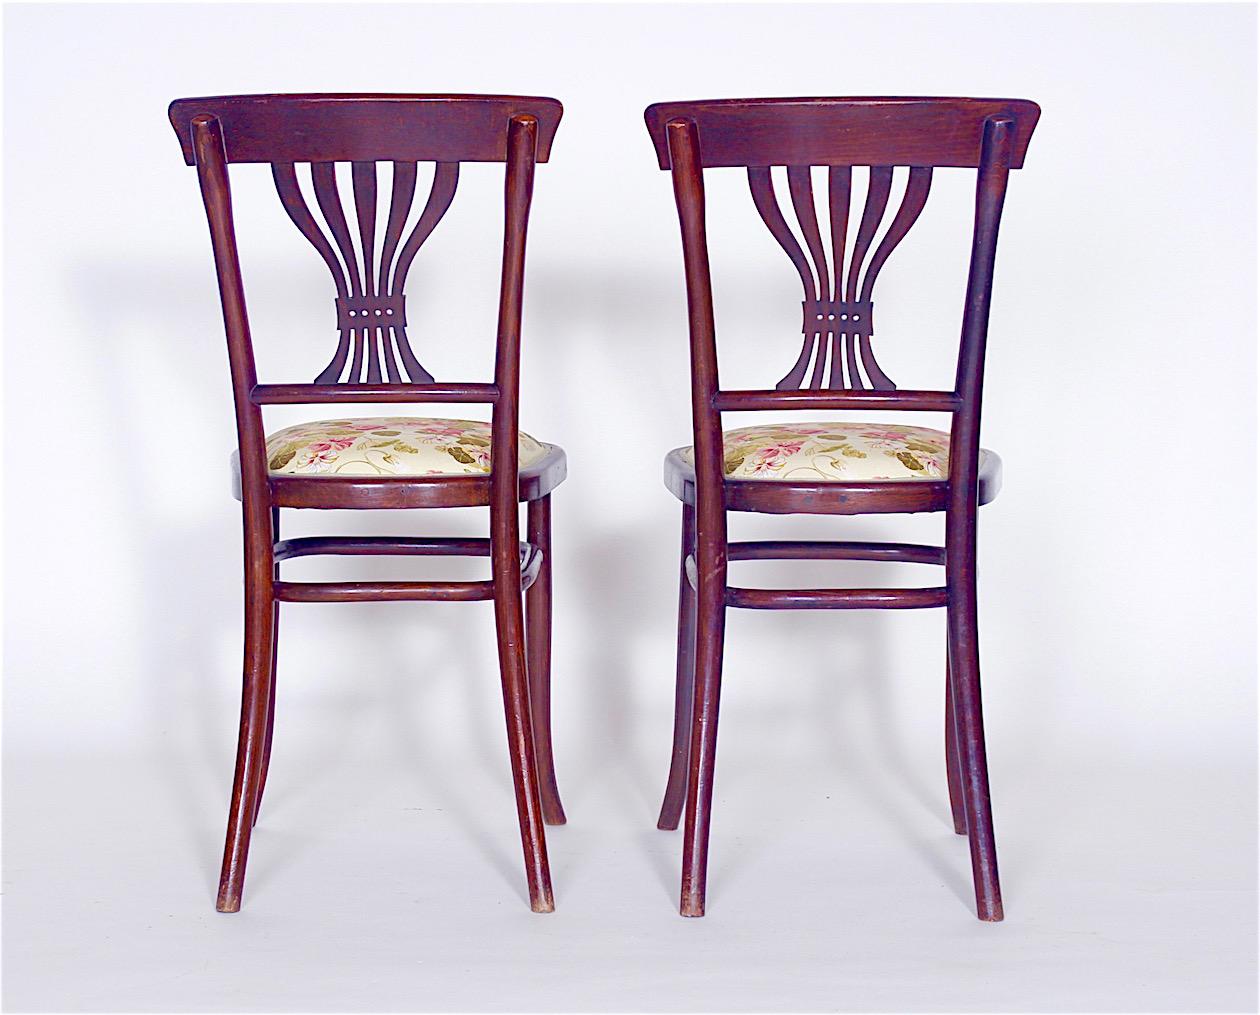 Jugendstil Set of Two Chairs and Two Armchairs, 1890s